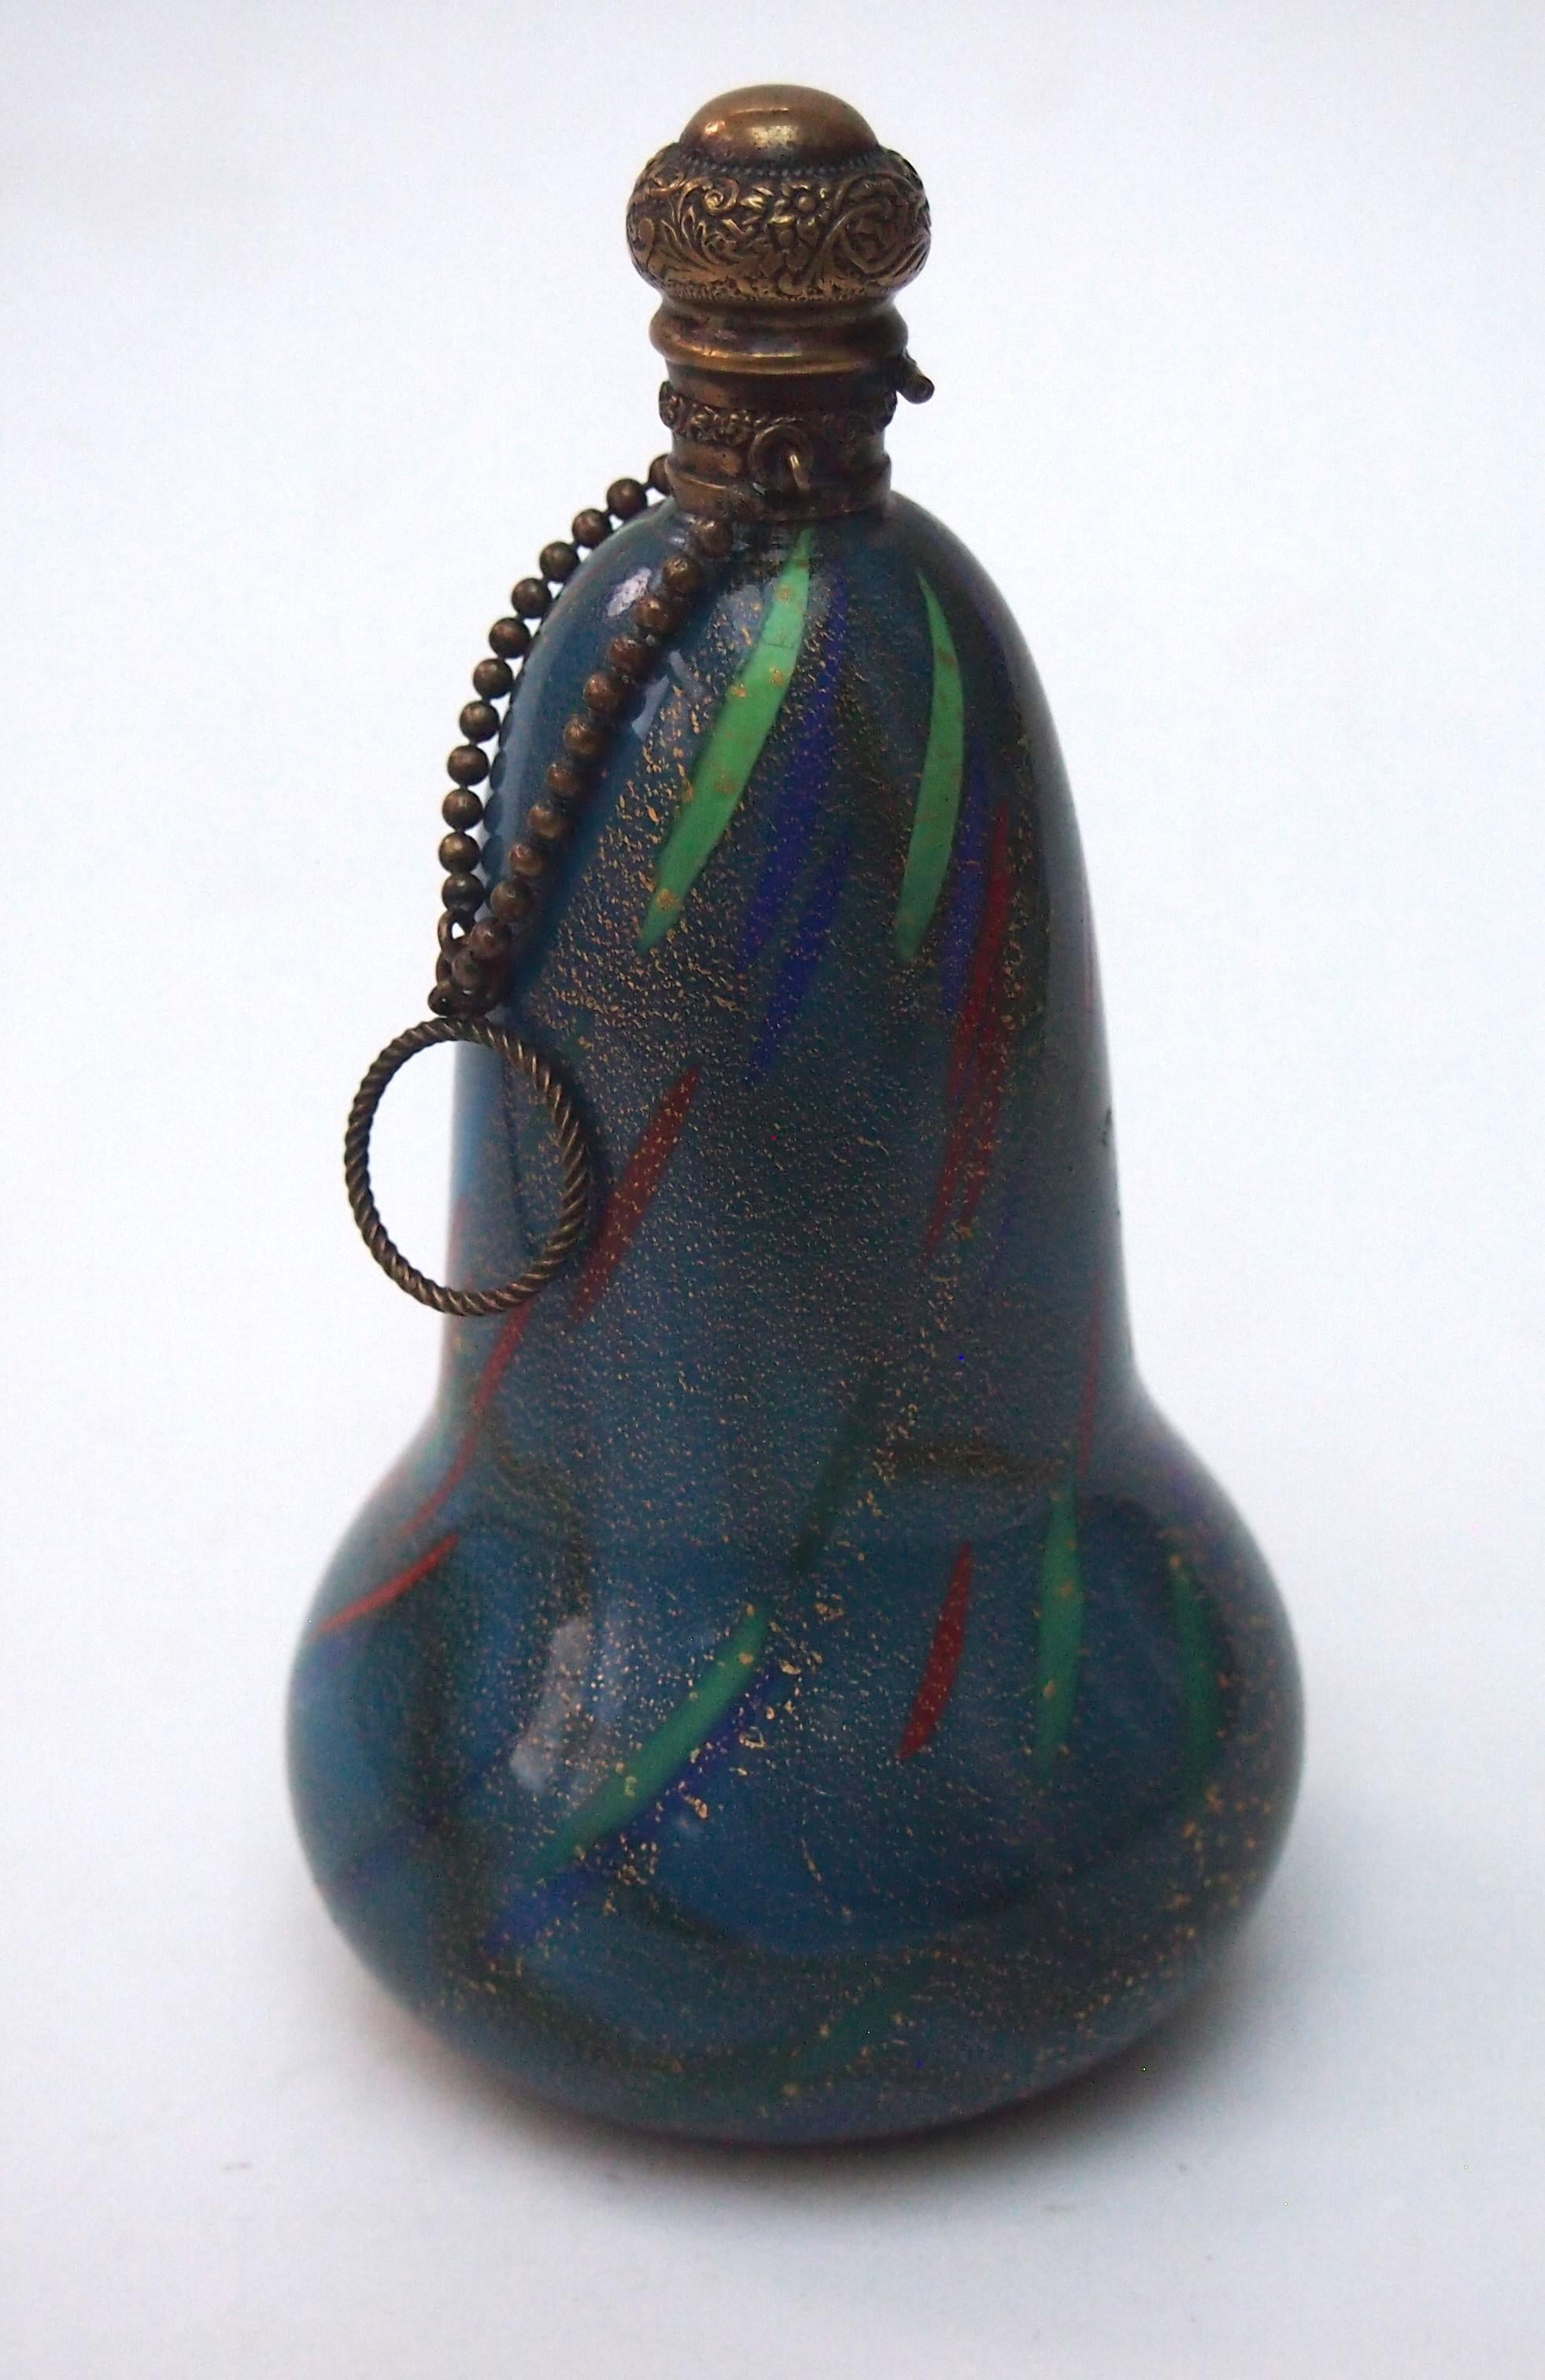 A vibrant Venetian medium-large glass scent bottle (just under 6 inches tall) with original glass stopper and metal hinged cap and chatelaine chain attachment. The glass sent bottle is from Murano and was made c1890. The finely moulded metal stopper